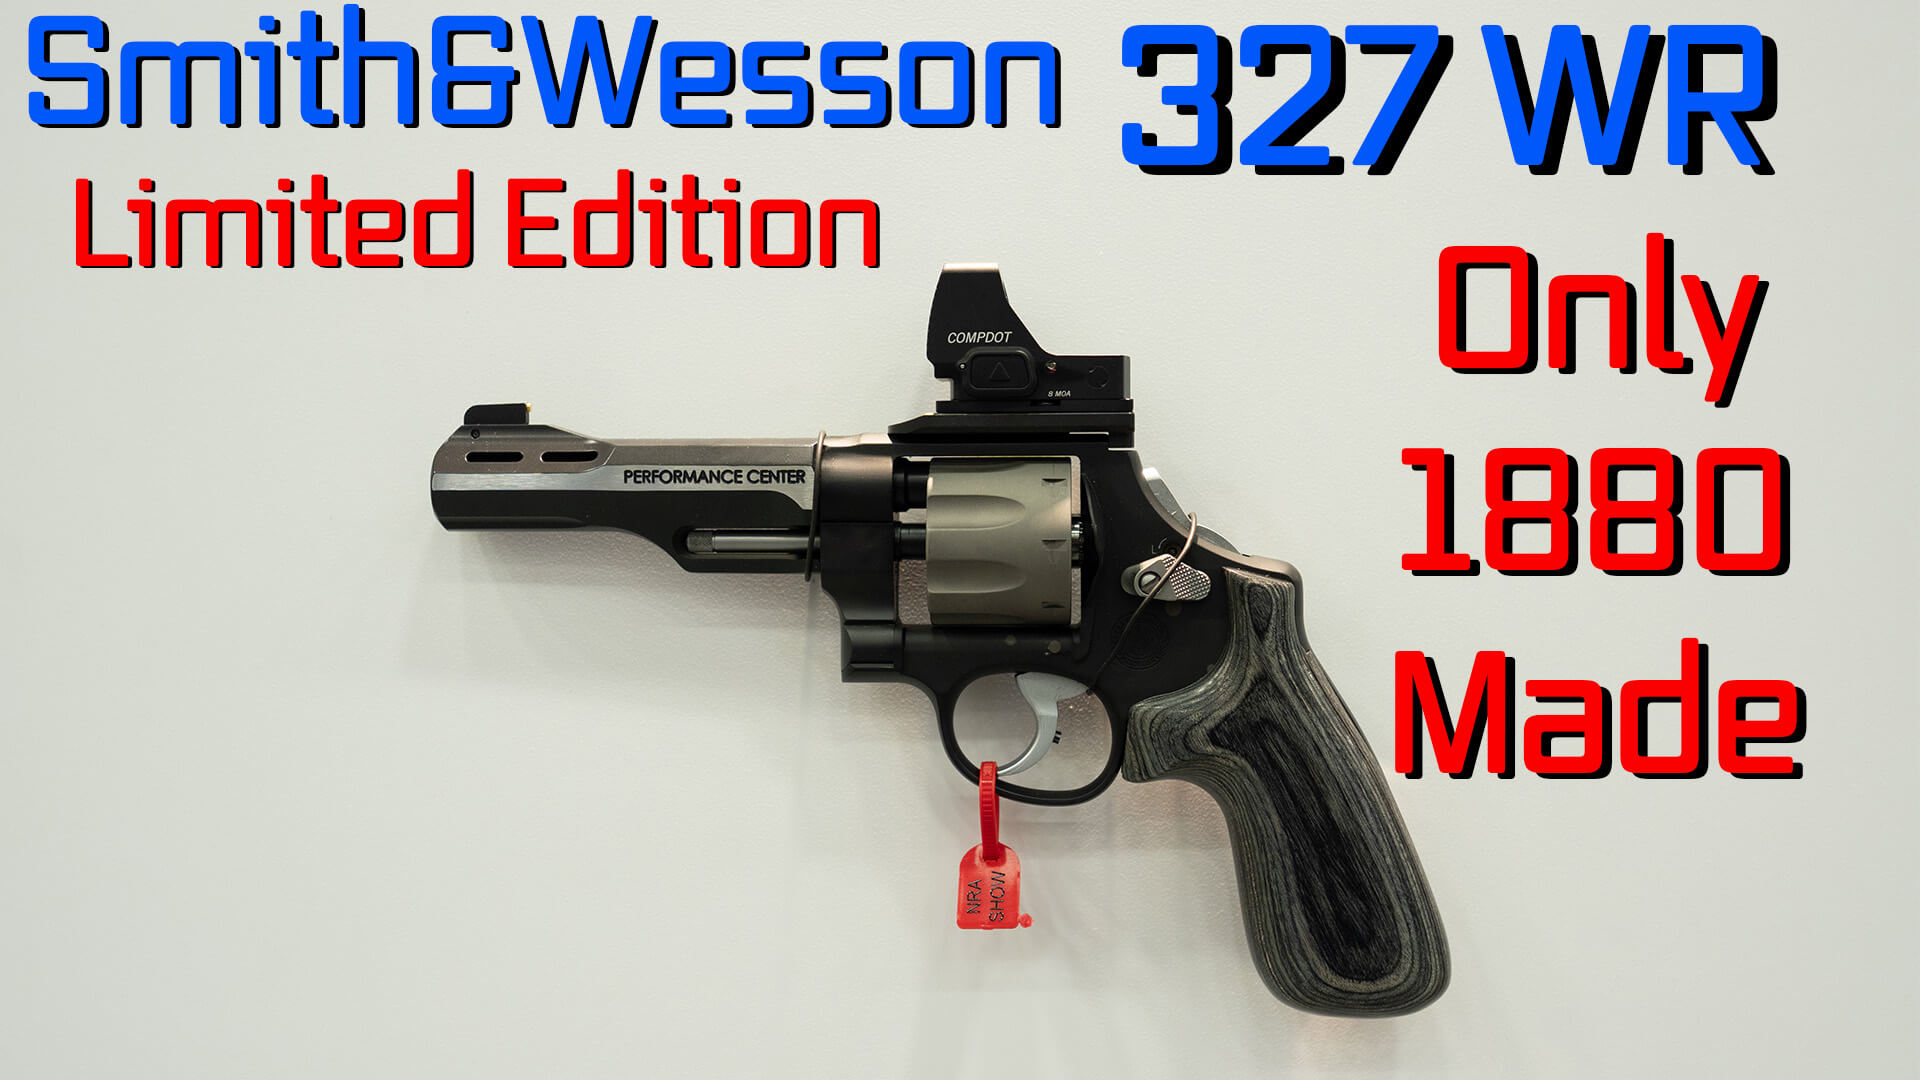 Fastest-Shooting Revolver Ever Made? S&W’s Model 327 WR